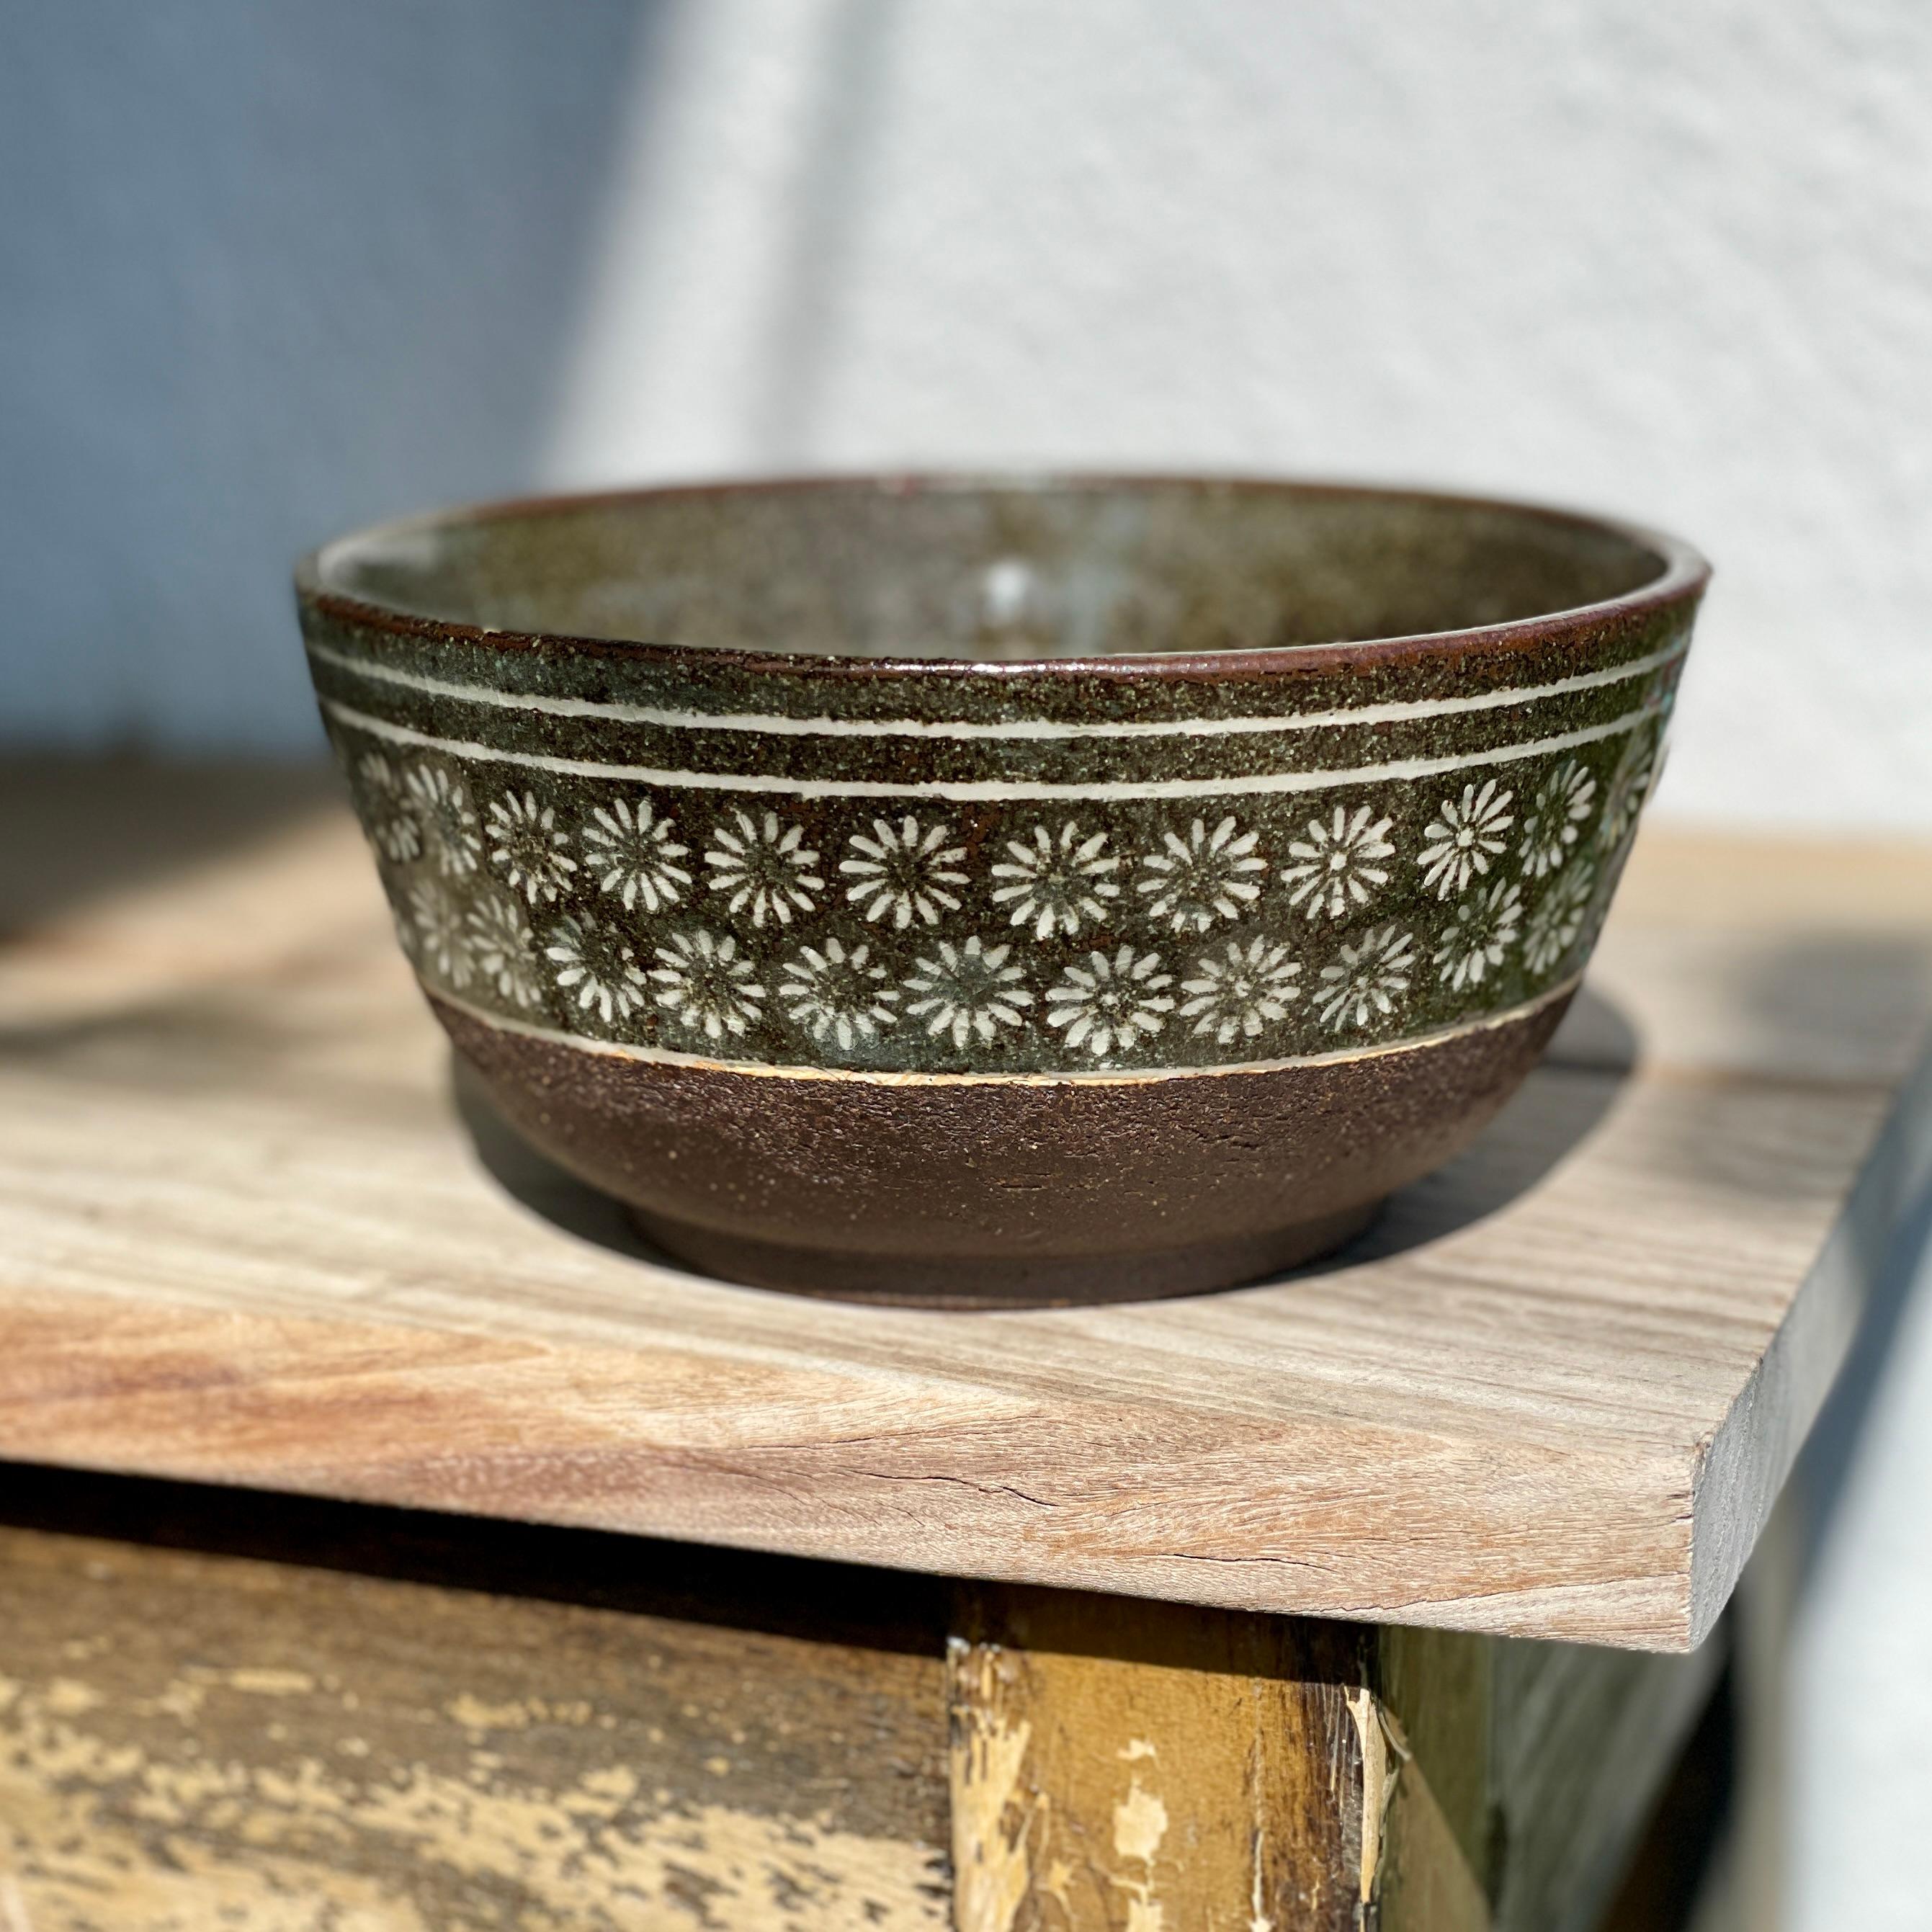 Decorative Buncheong Flower Bowl by Jason Fox.

A Southern Californian for over half his life, Contemporary Ceramic Artist Jason Fox draws upon his classical education in Architecture and Art History as well as his love of surfing and the ocean. He